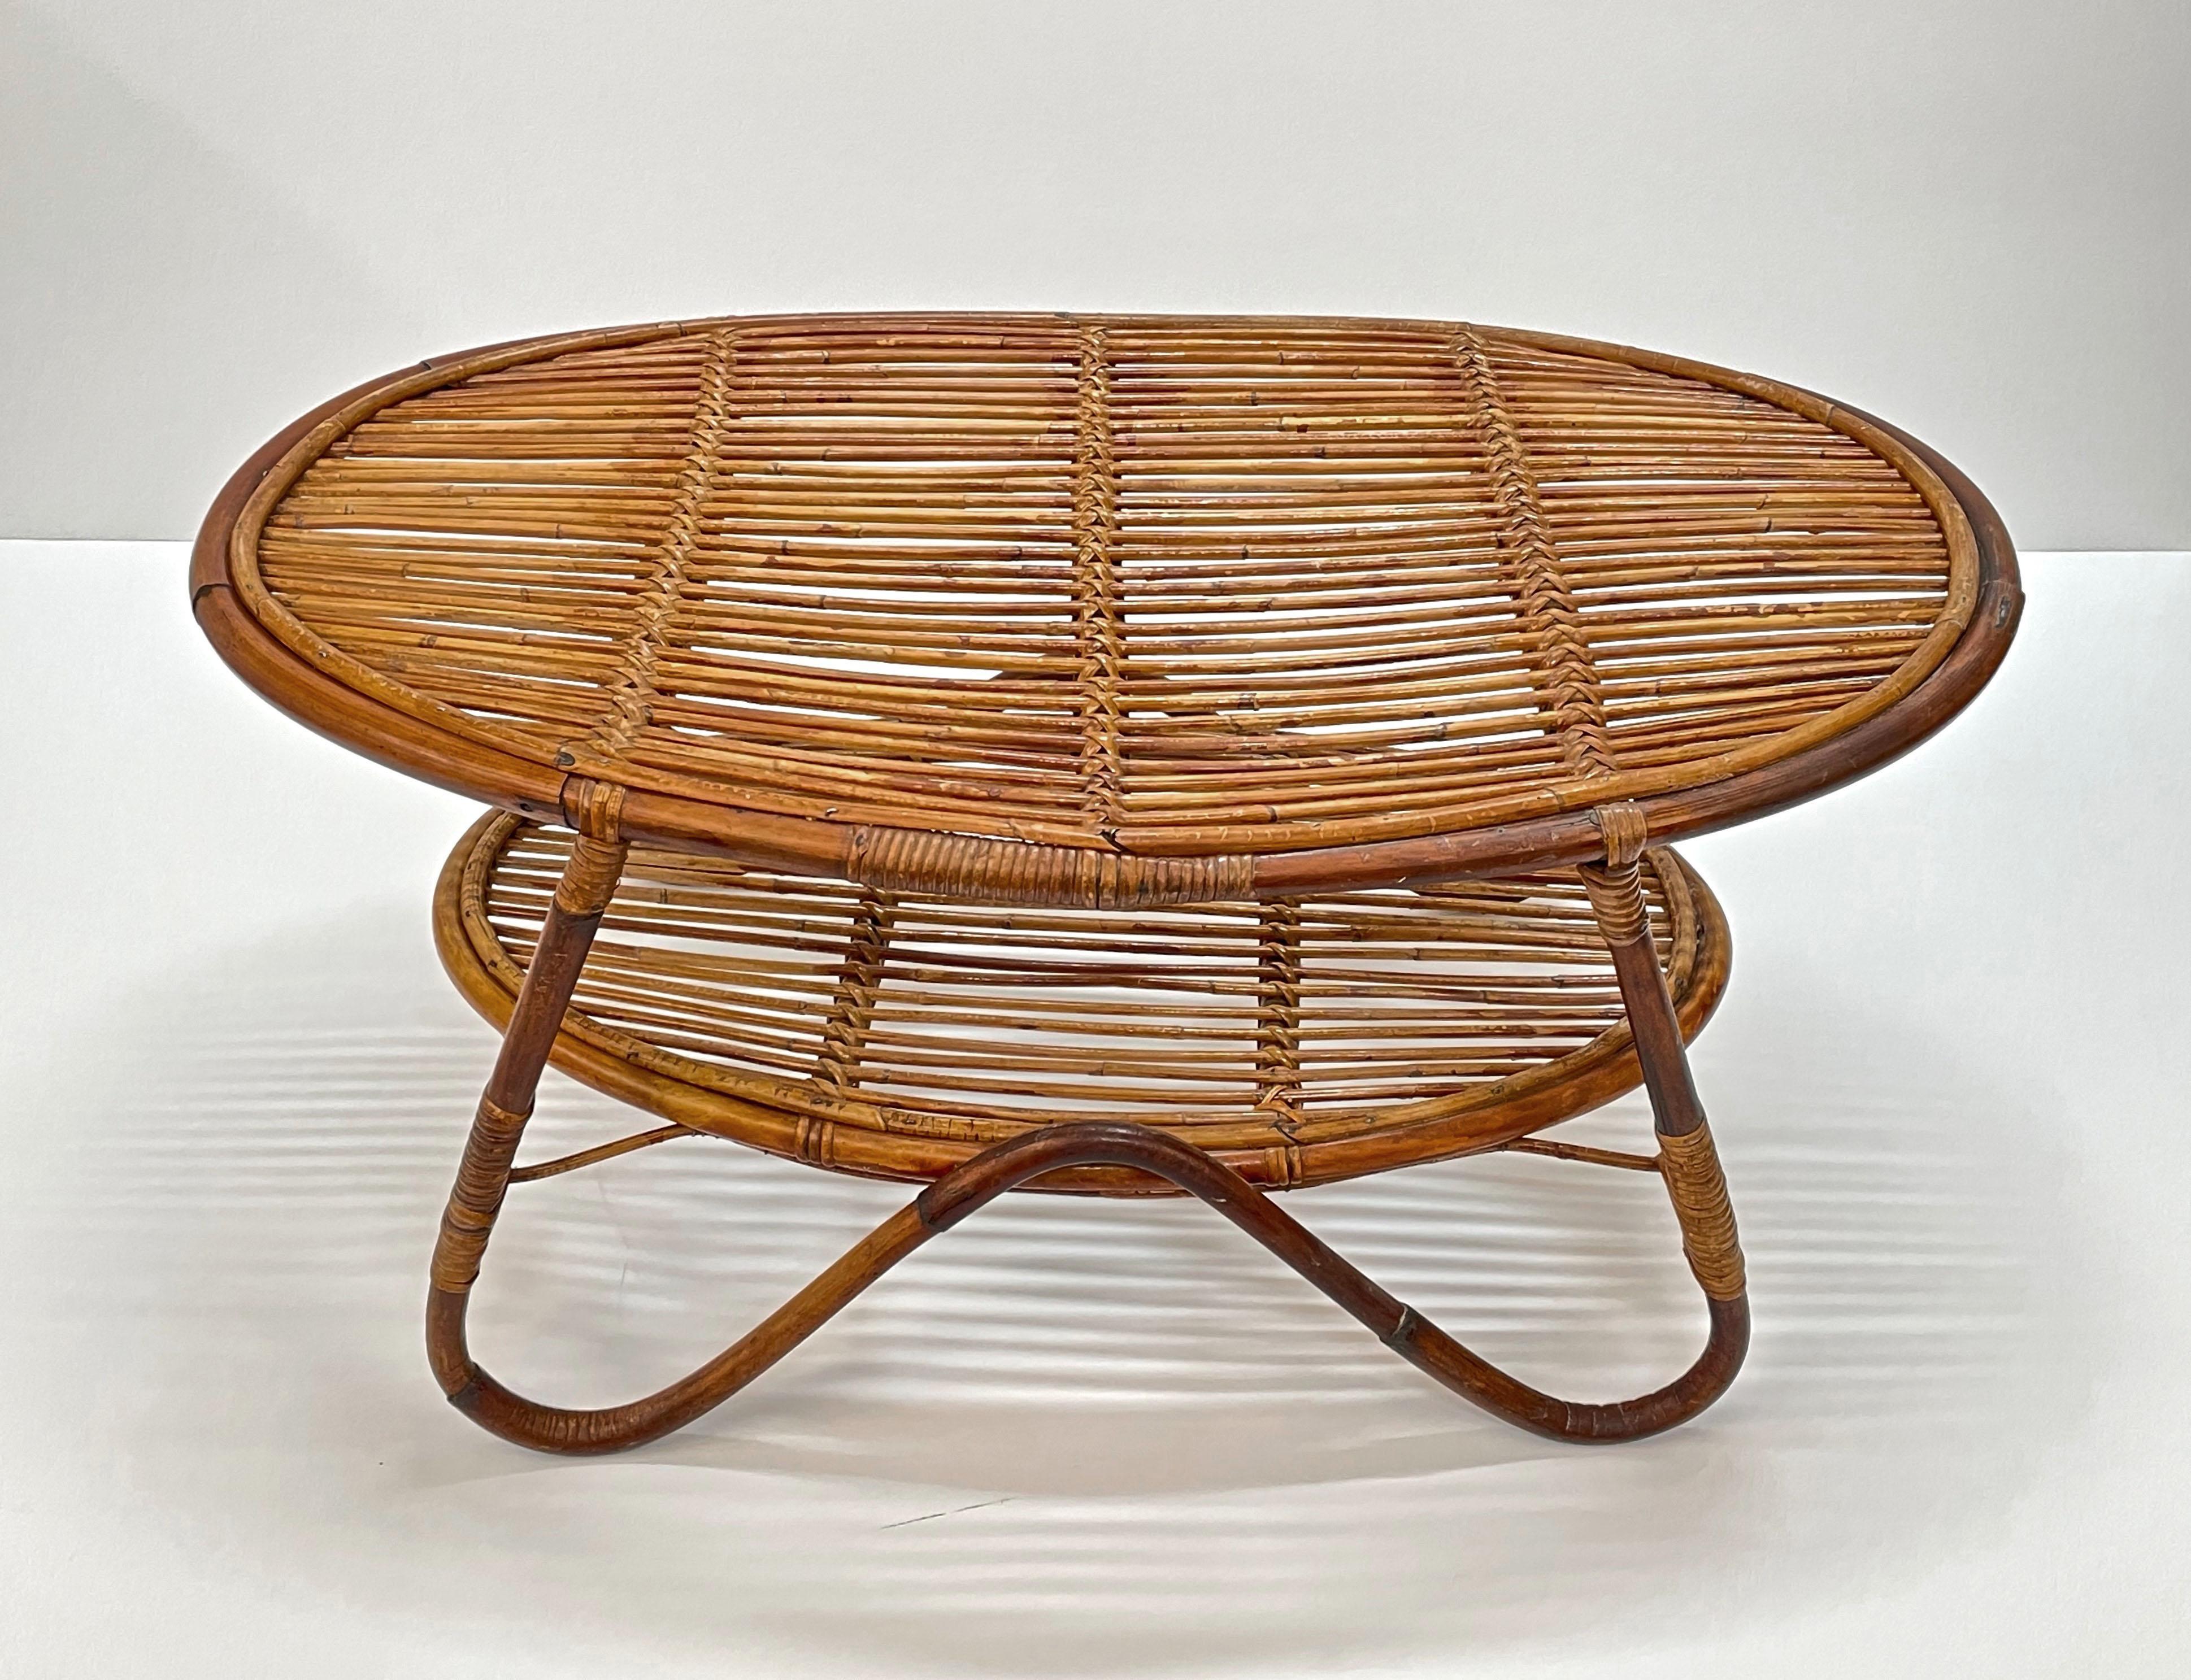 Midcentury Italian Oval Rattan and Bamboo Two Levels Coffee Table, 1950s For Sale 10